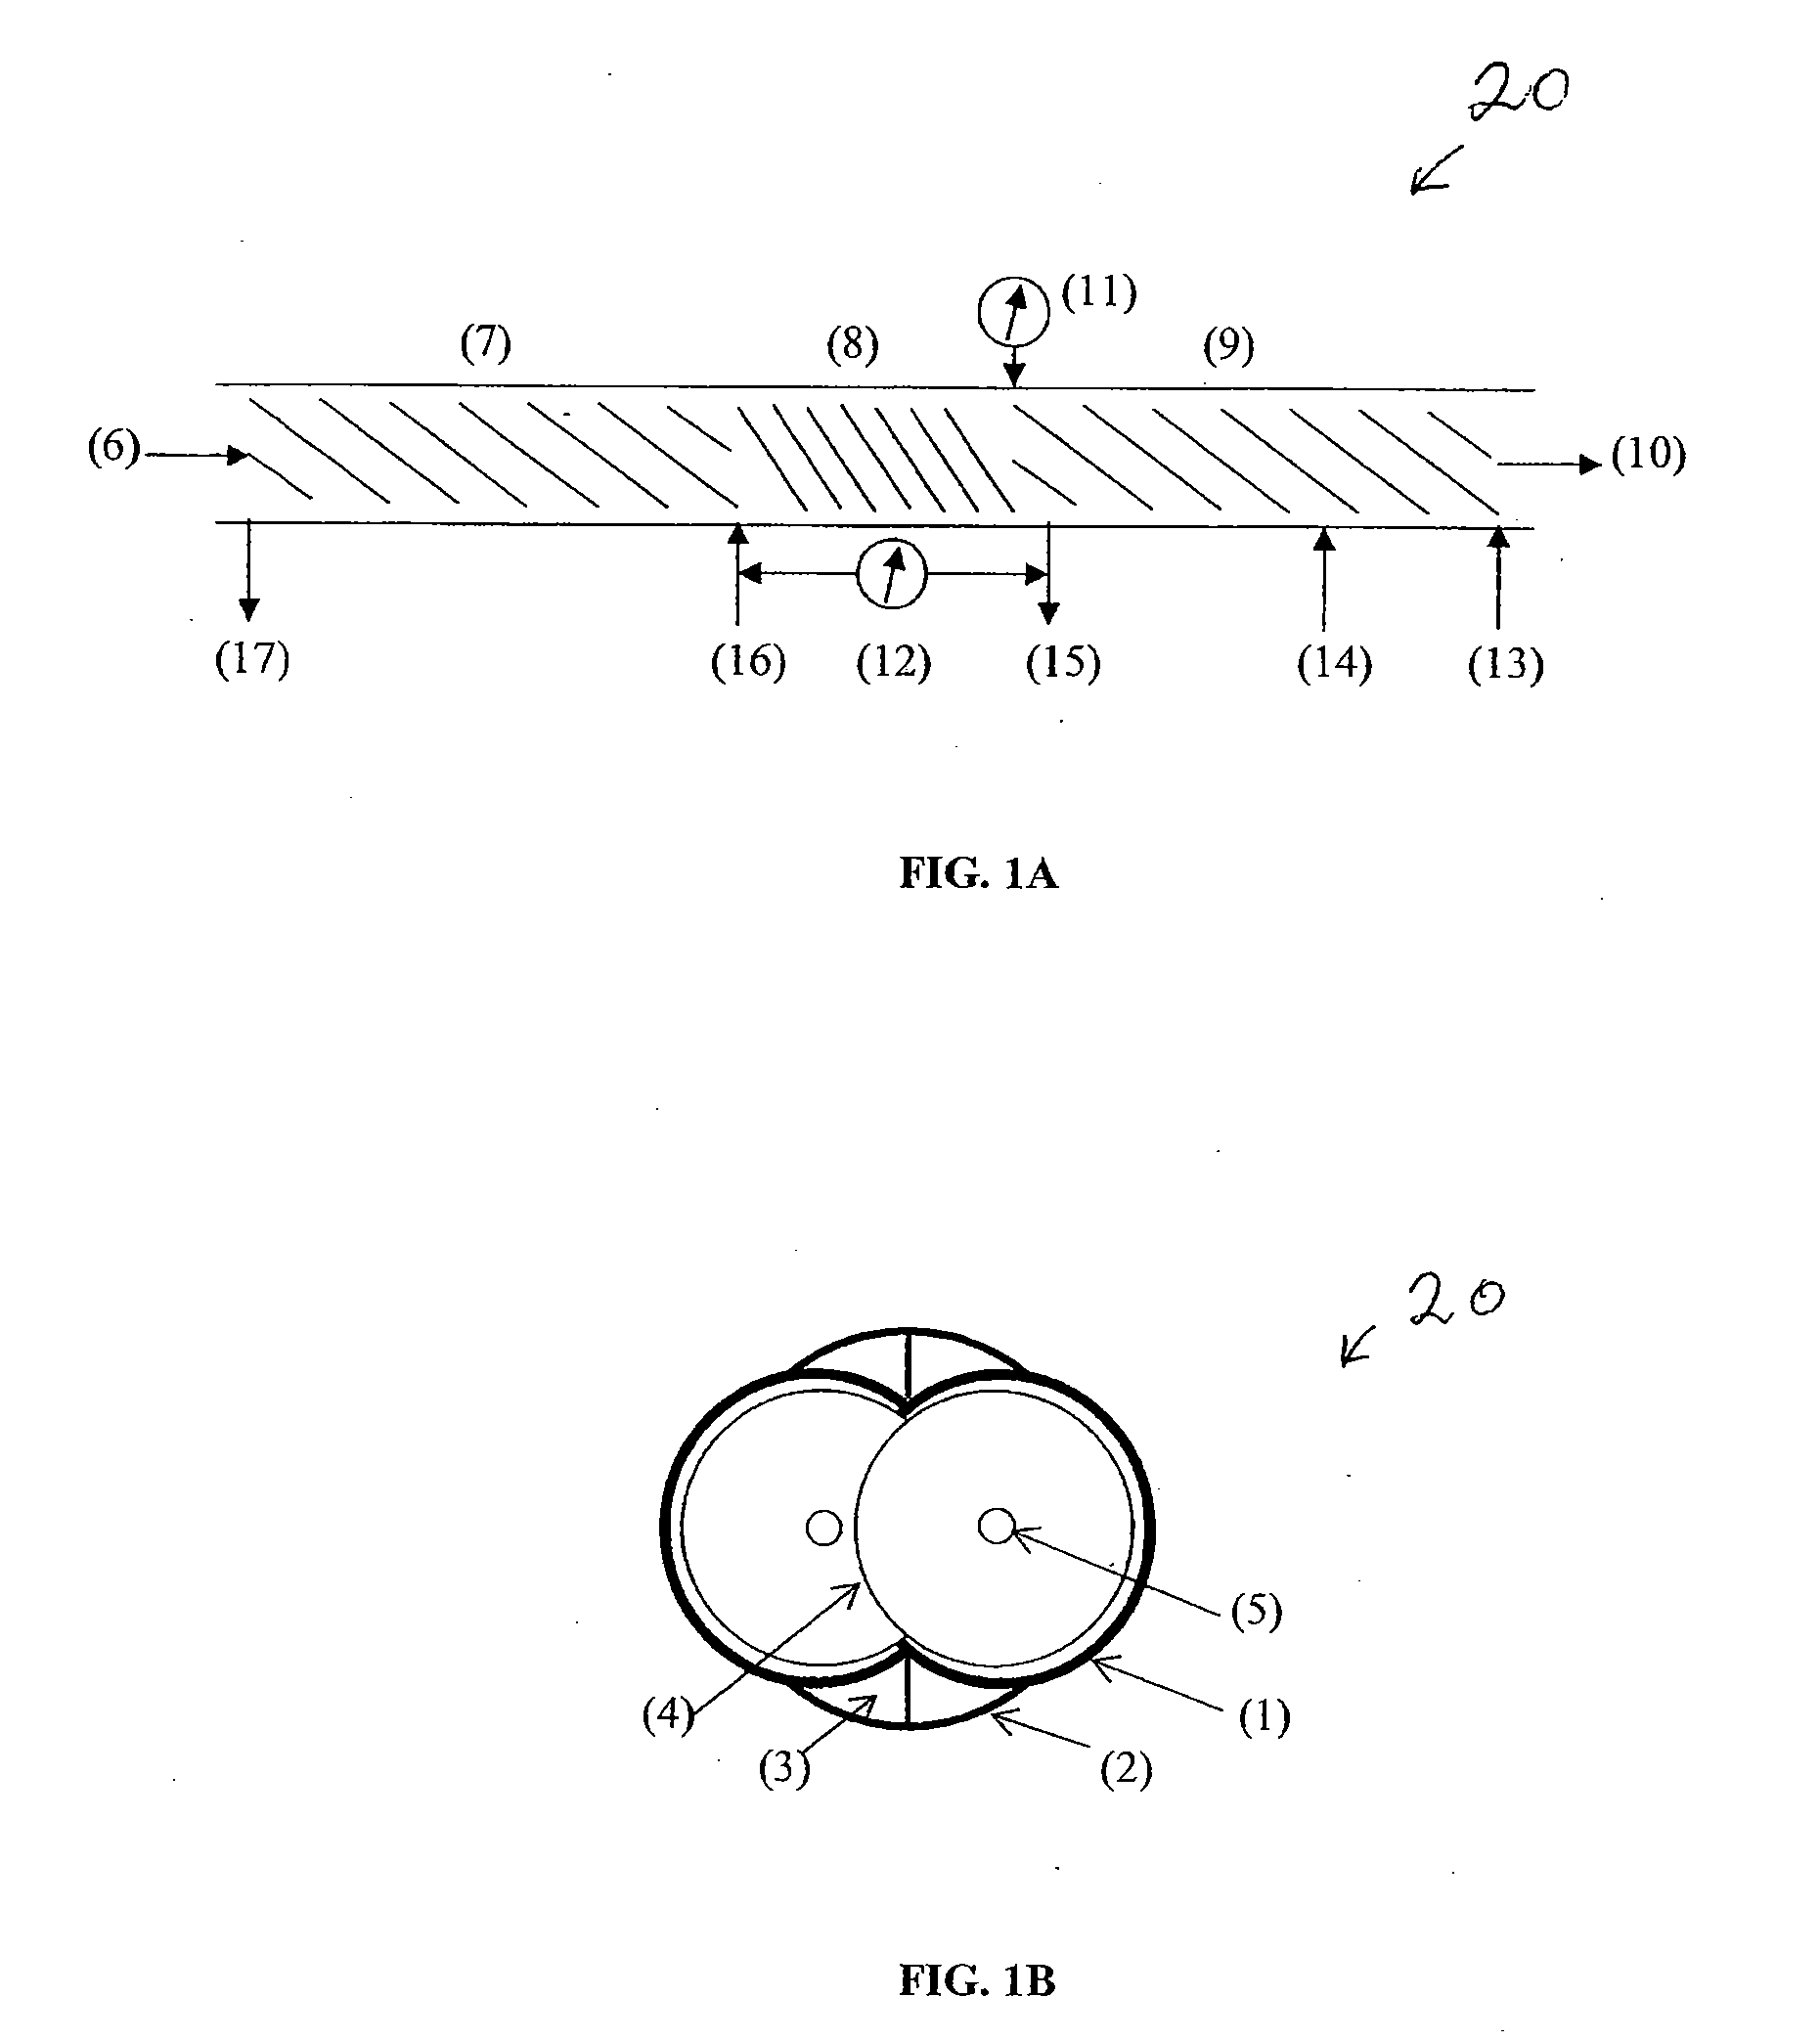 Moving bed biomass fractionation system and method